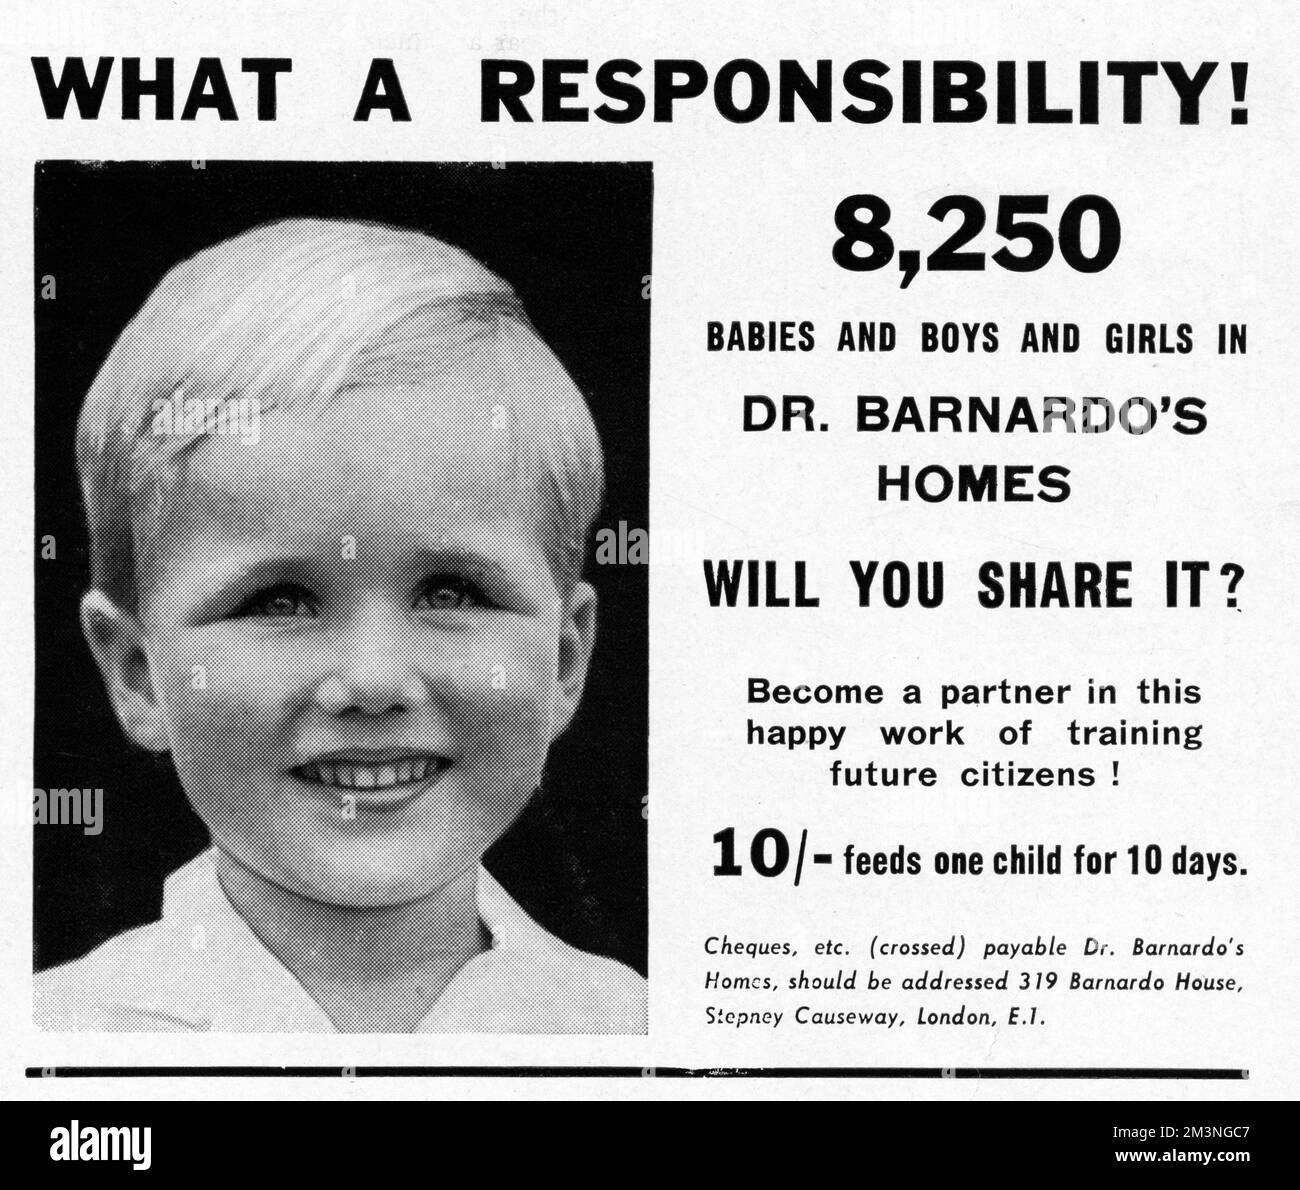 'What a responsibility!' 8,250 babies and boys and girls in Dr. Barnardo's homes. Will you share it?  Become a partner in this happy work of training future citizens!  10'- feeds one child for ten 10 days.     Date: 1941 Stock Photo